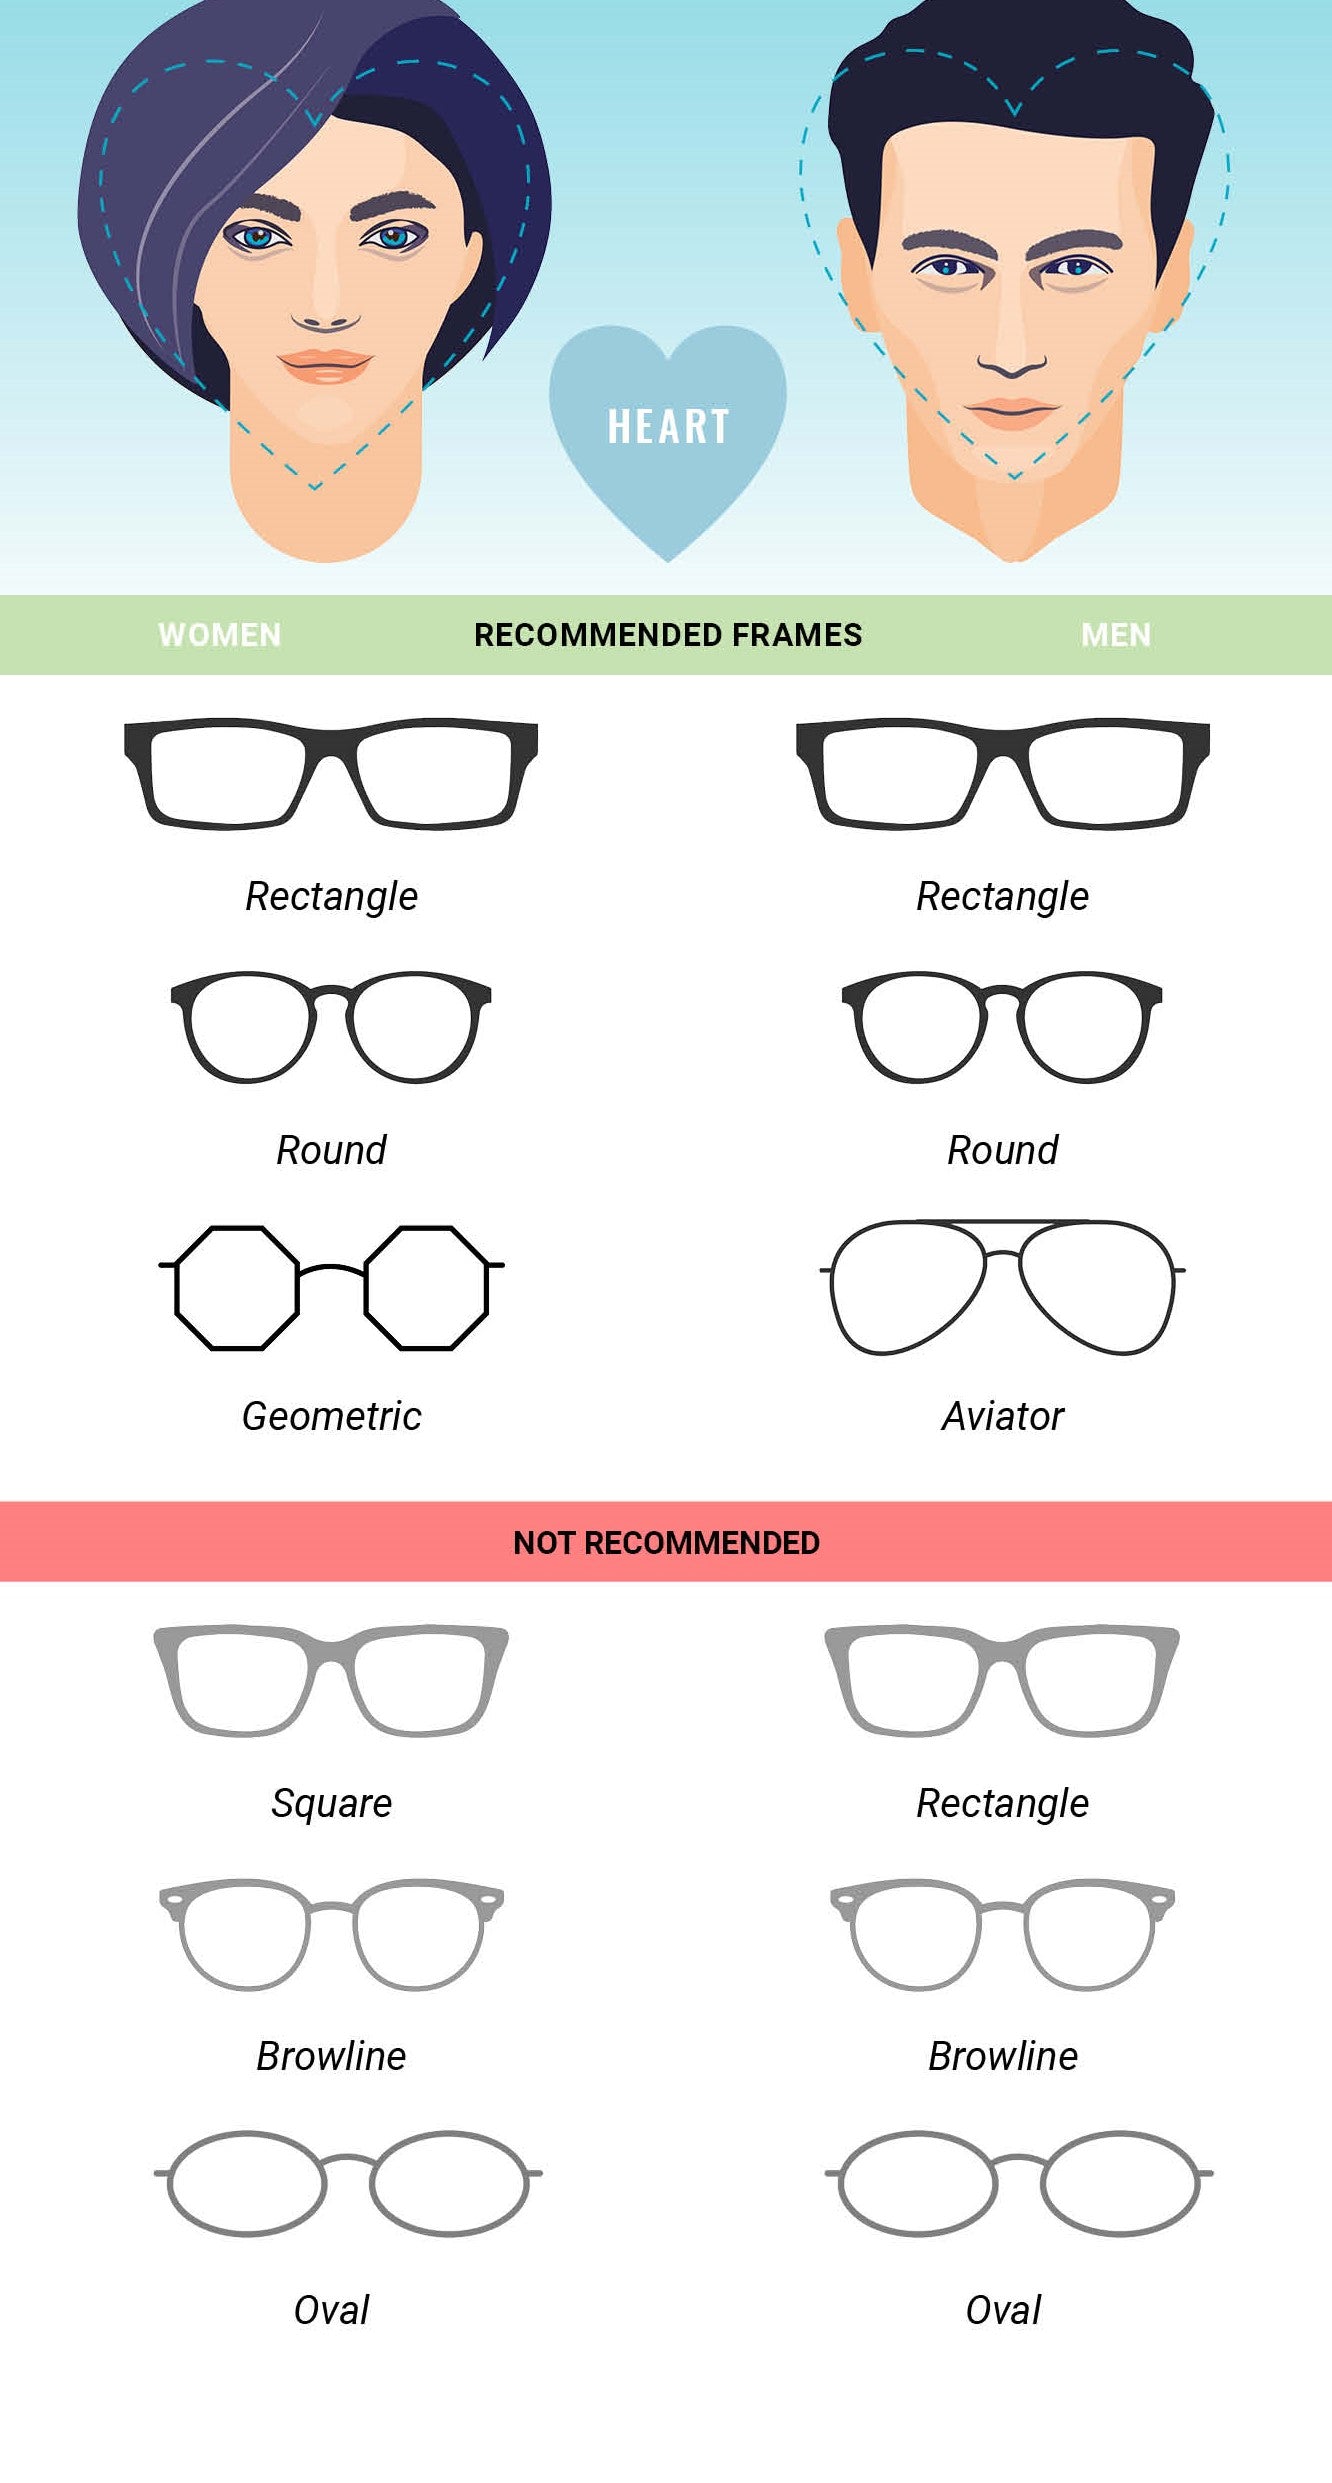 How To Find The Best Eyeglasses For Your Face Shape | Sol Optix